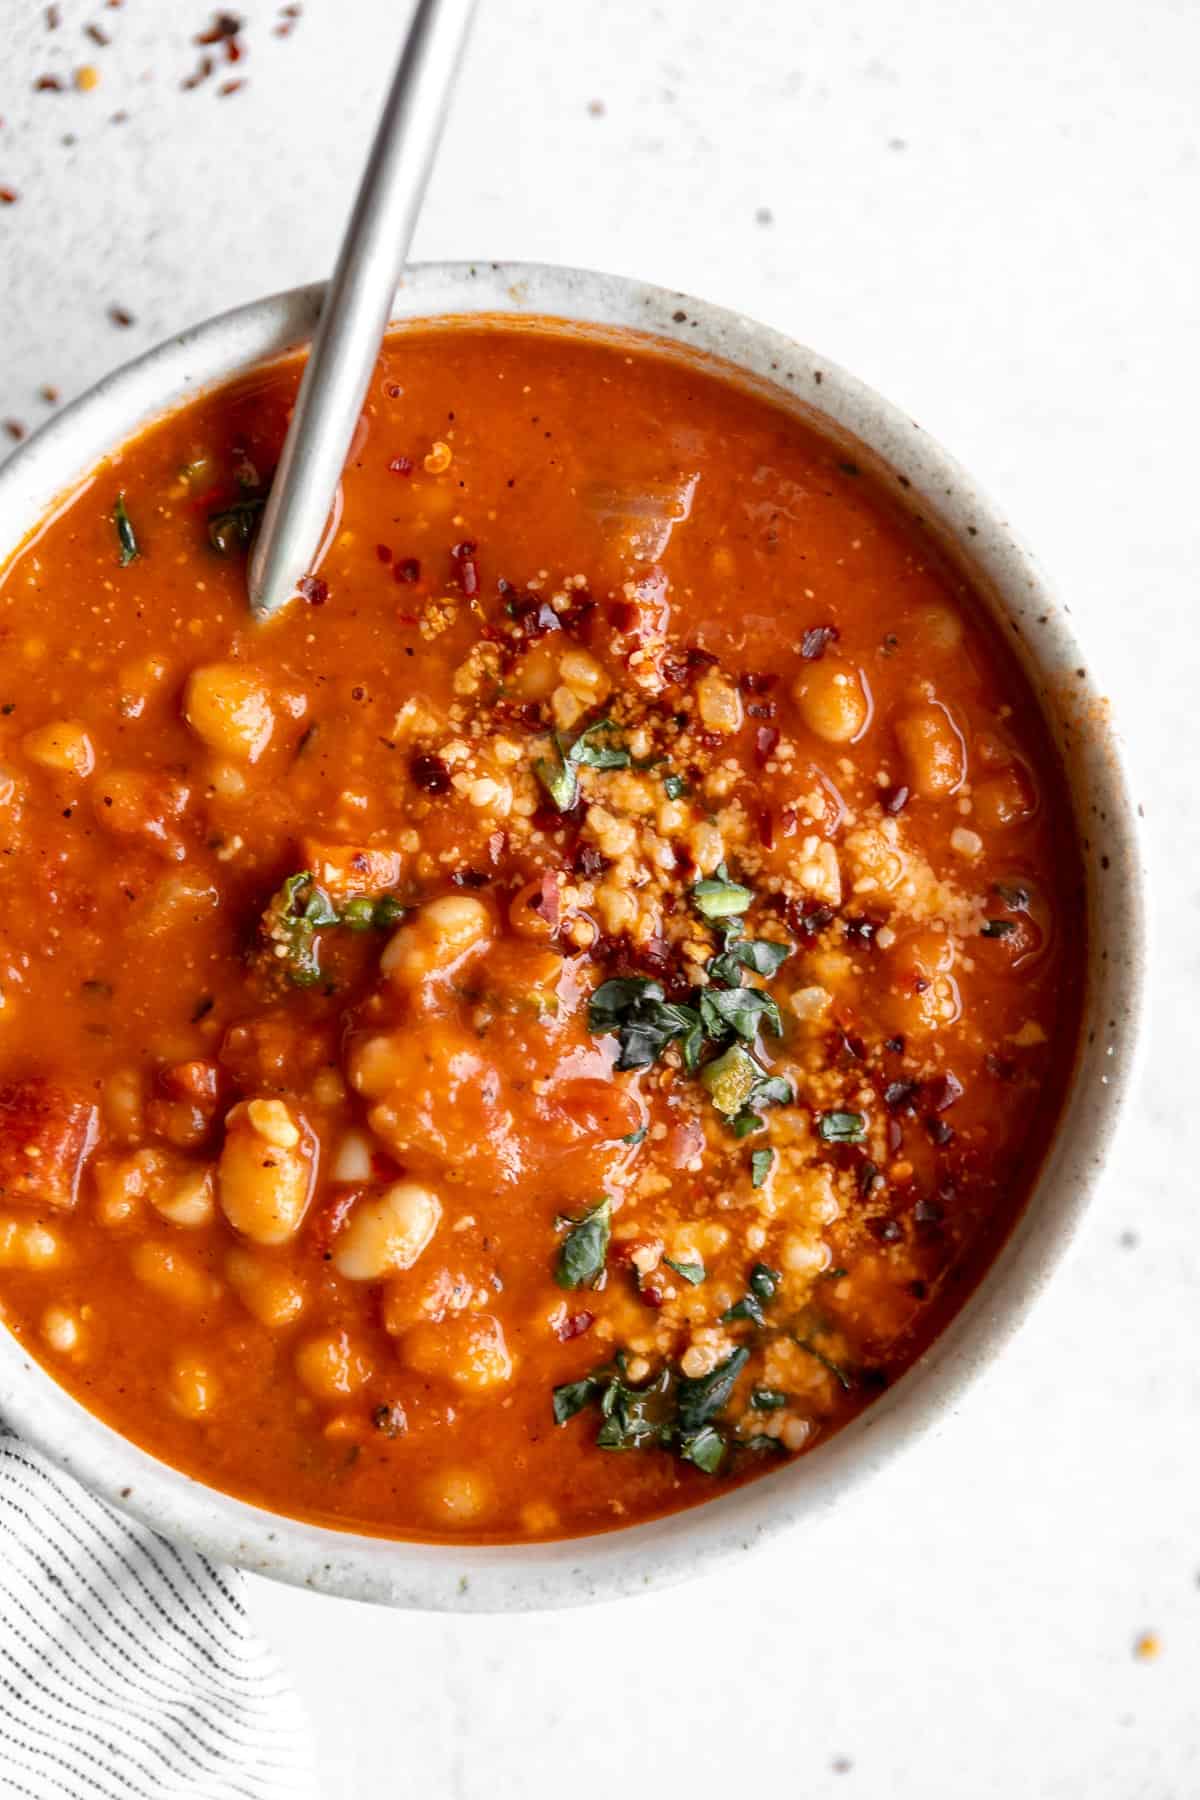 up close image of the vegan white bean tomato soup in a bowl with red pepper flakes on top